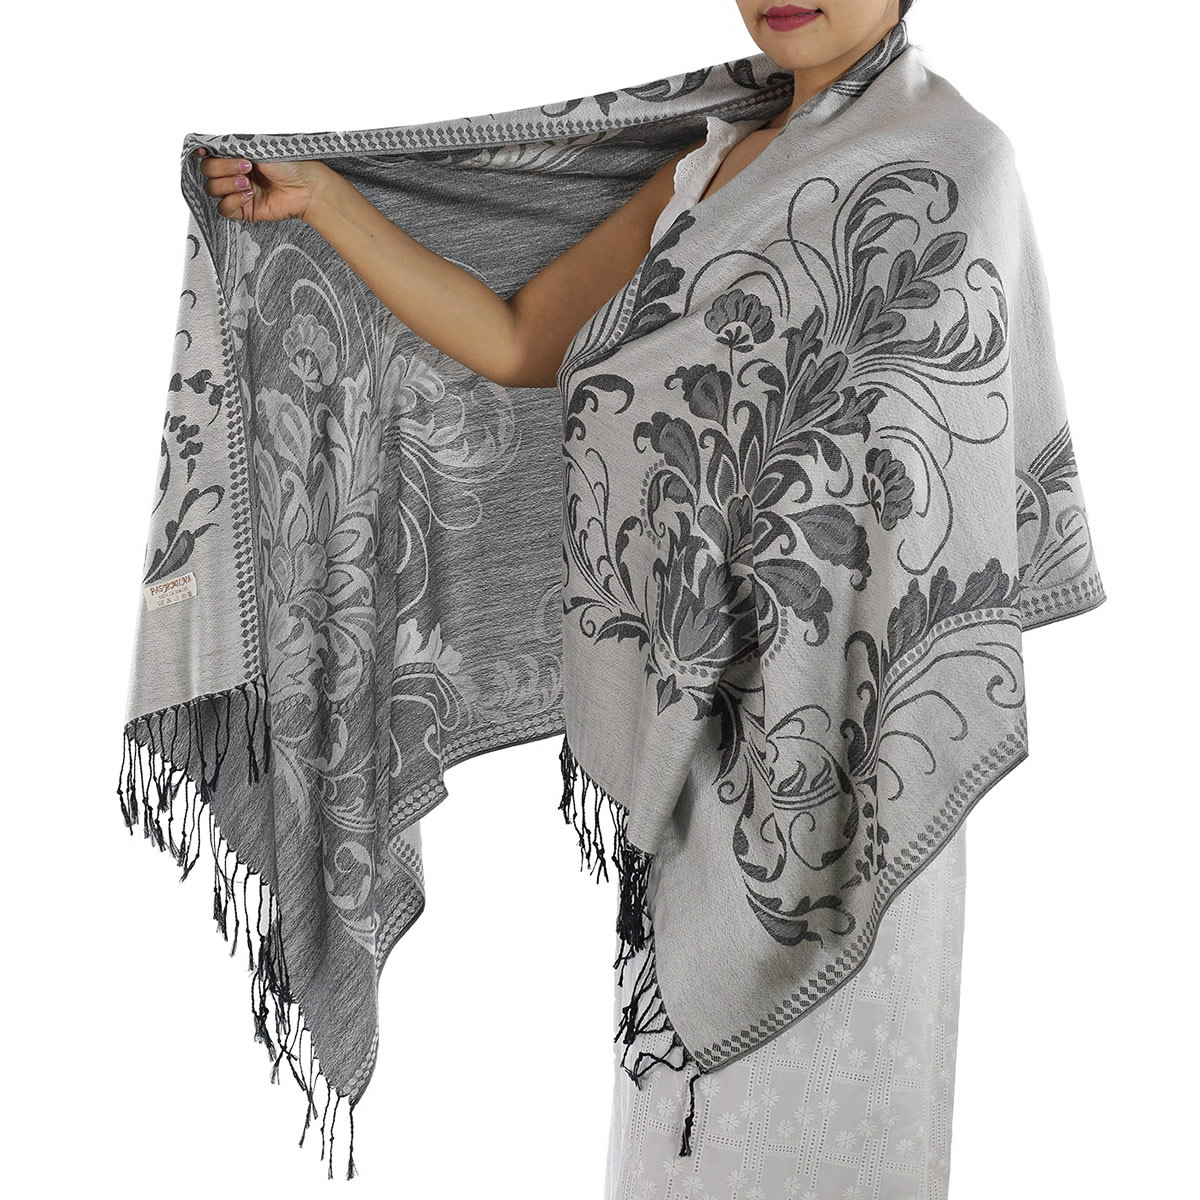 * Looking for a Beautiful Patterned Silver Pashmina?